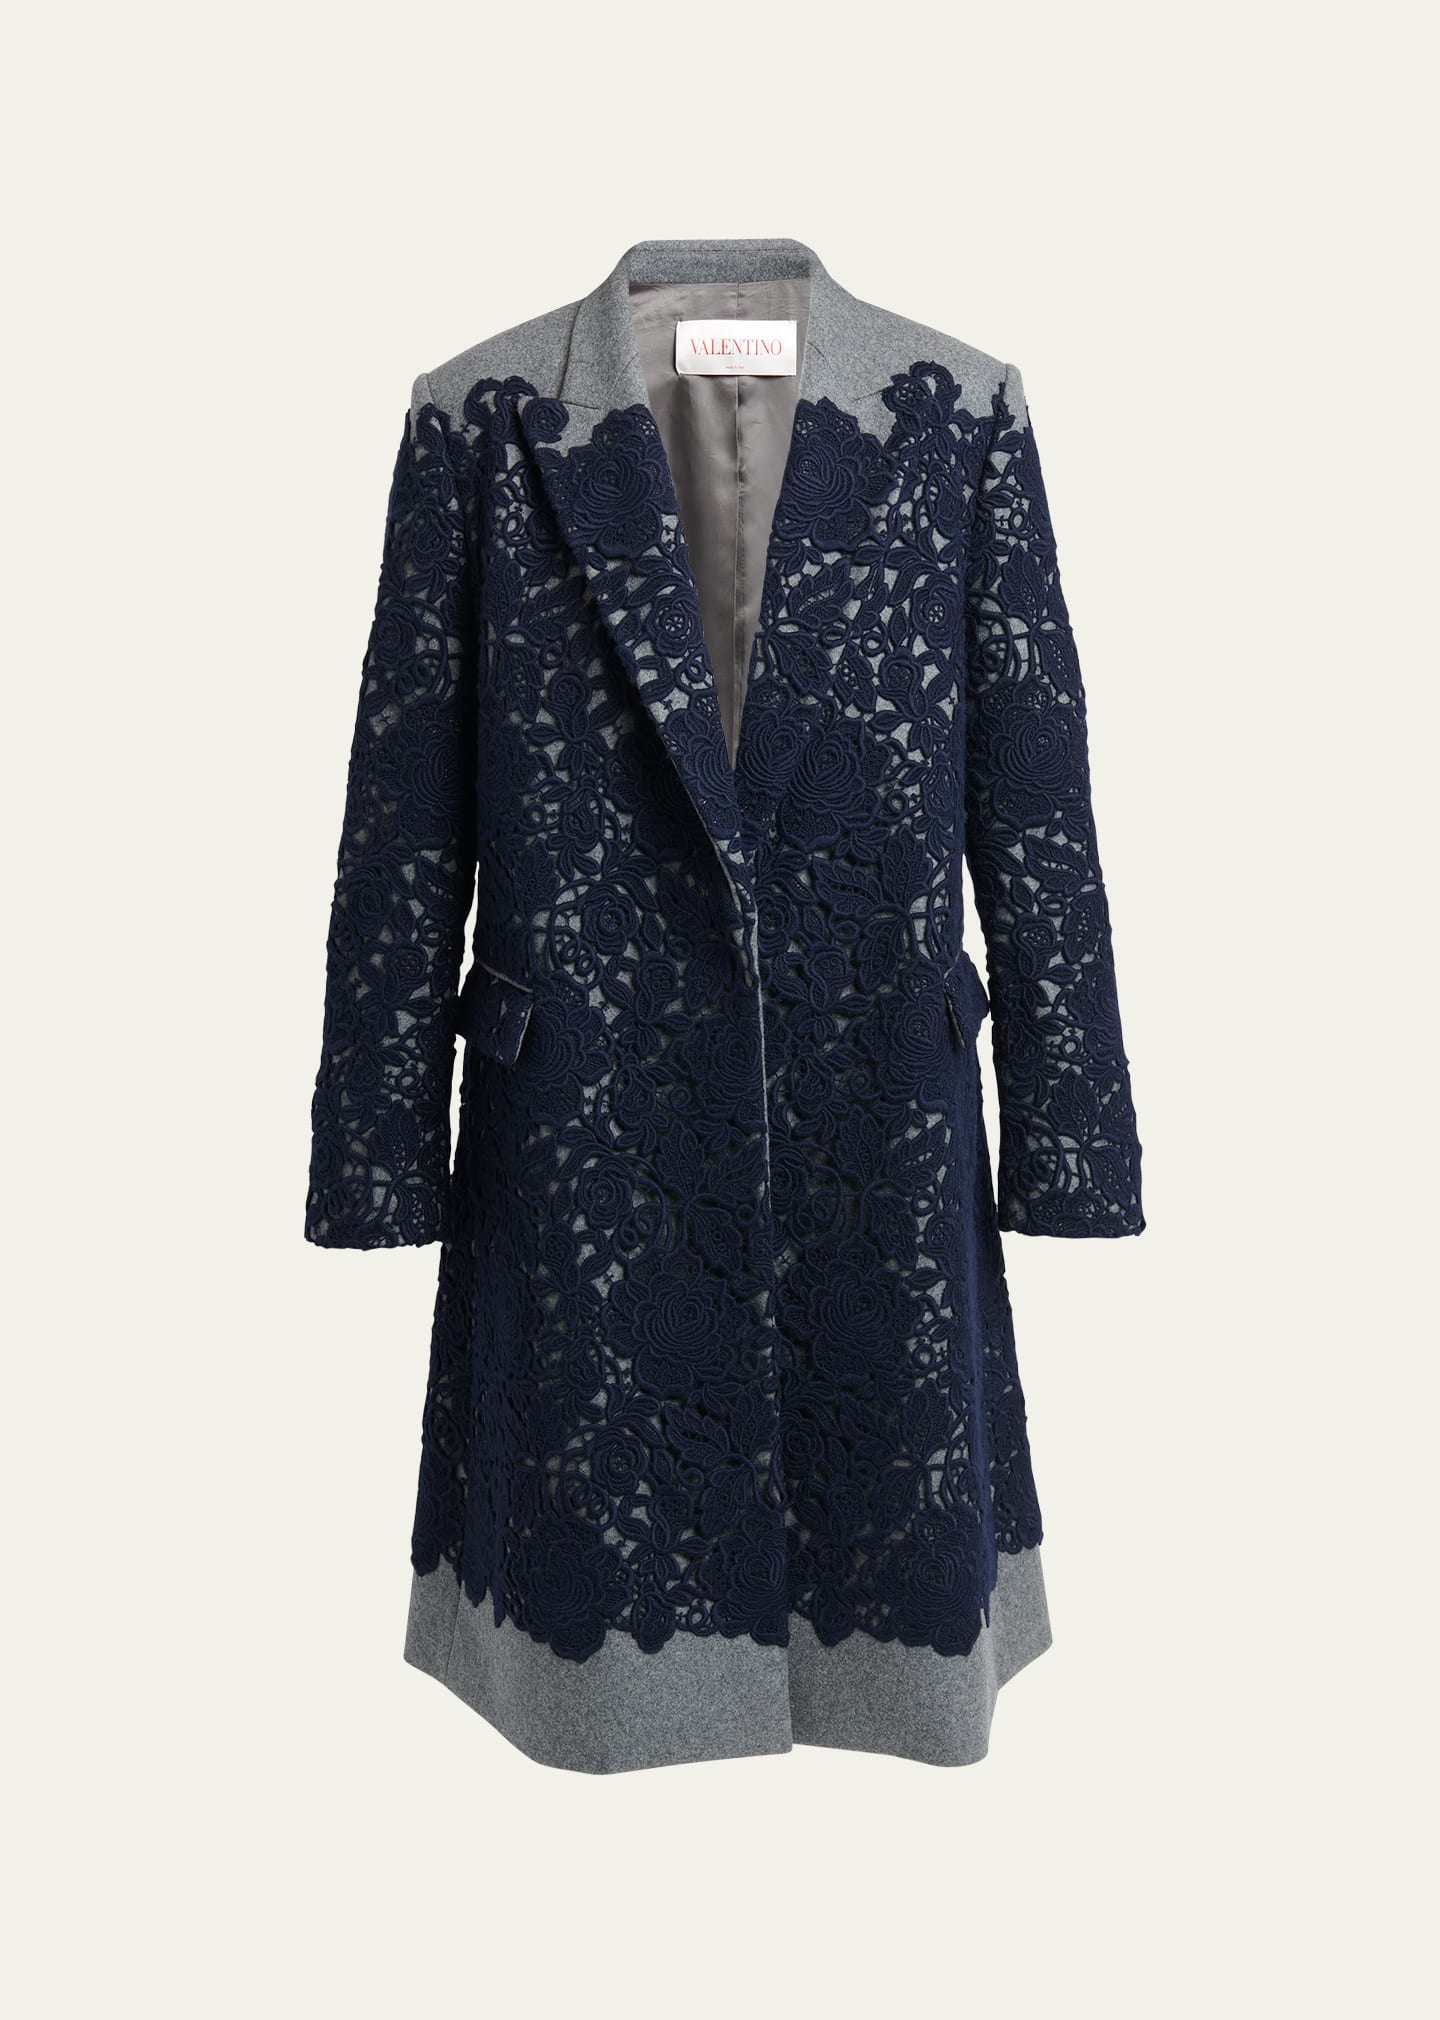 Valentino Floral Lace Applique Overcoat In Grey